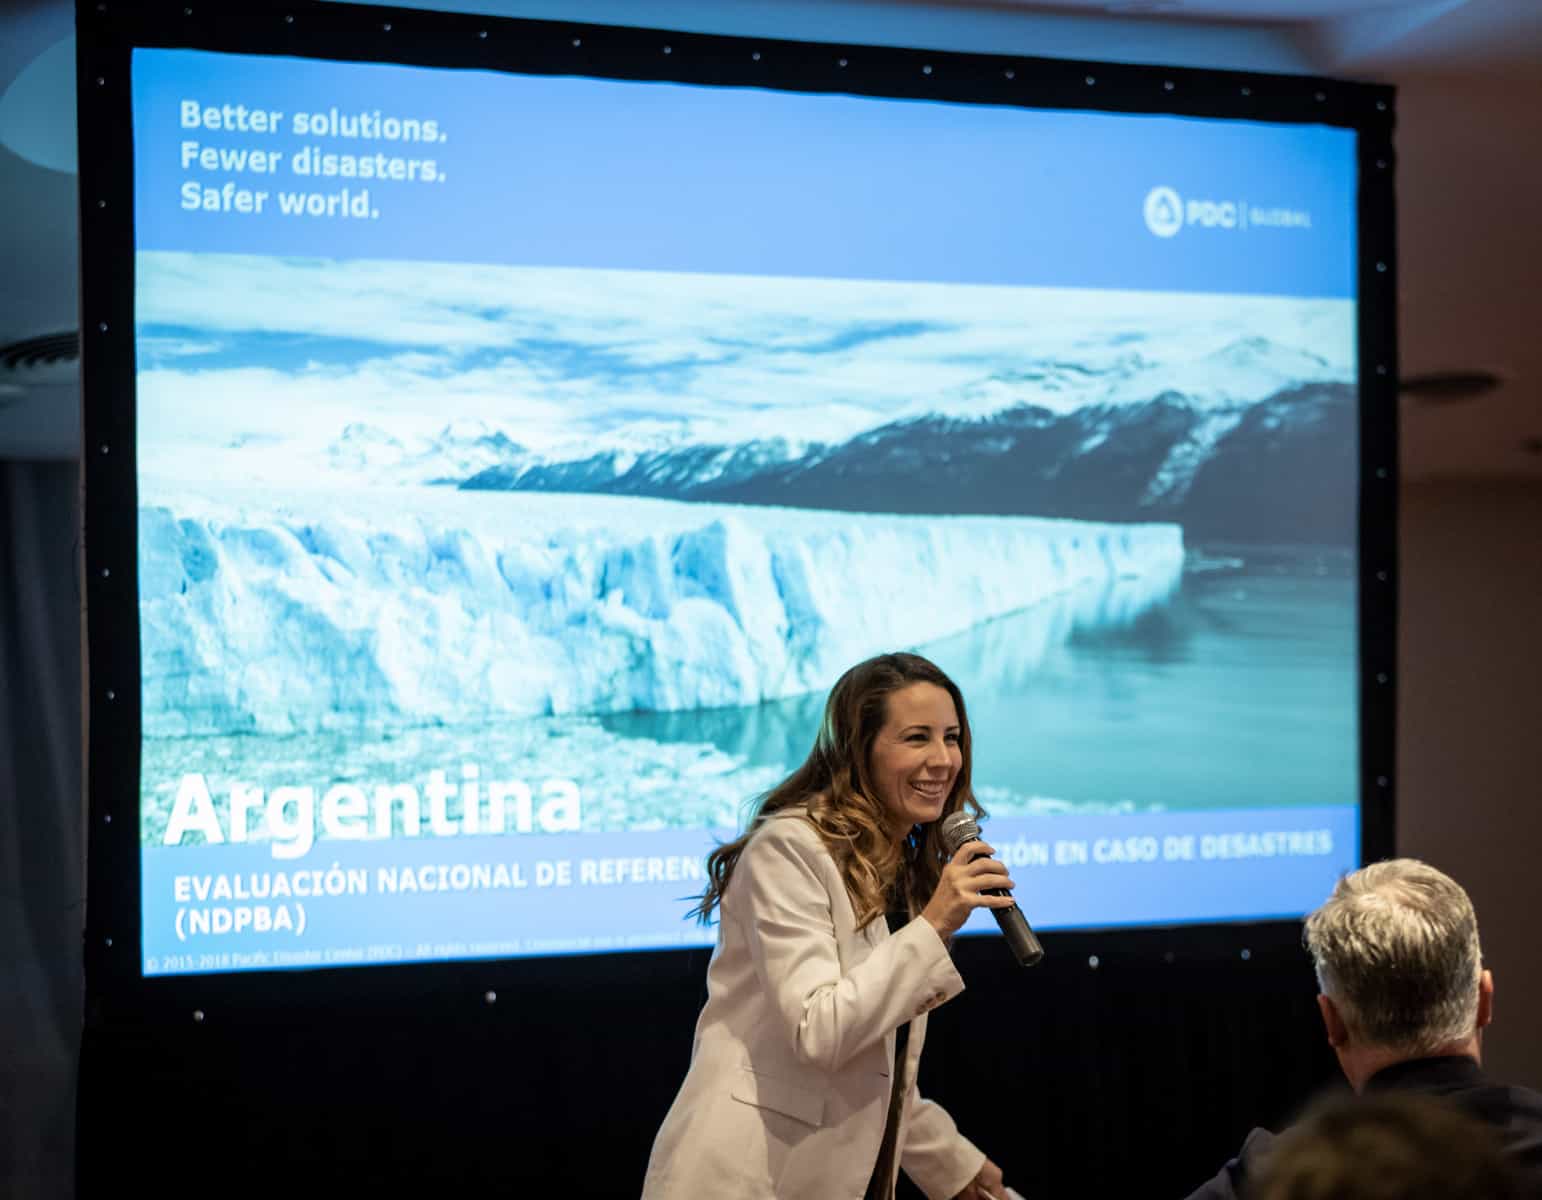 Stakeholders collaborate and exchange information during Argentina's National Disaster Preparedness Baseline Assessment (NDPBA) Kick-Off Meeting